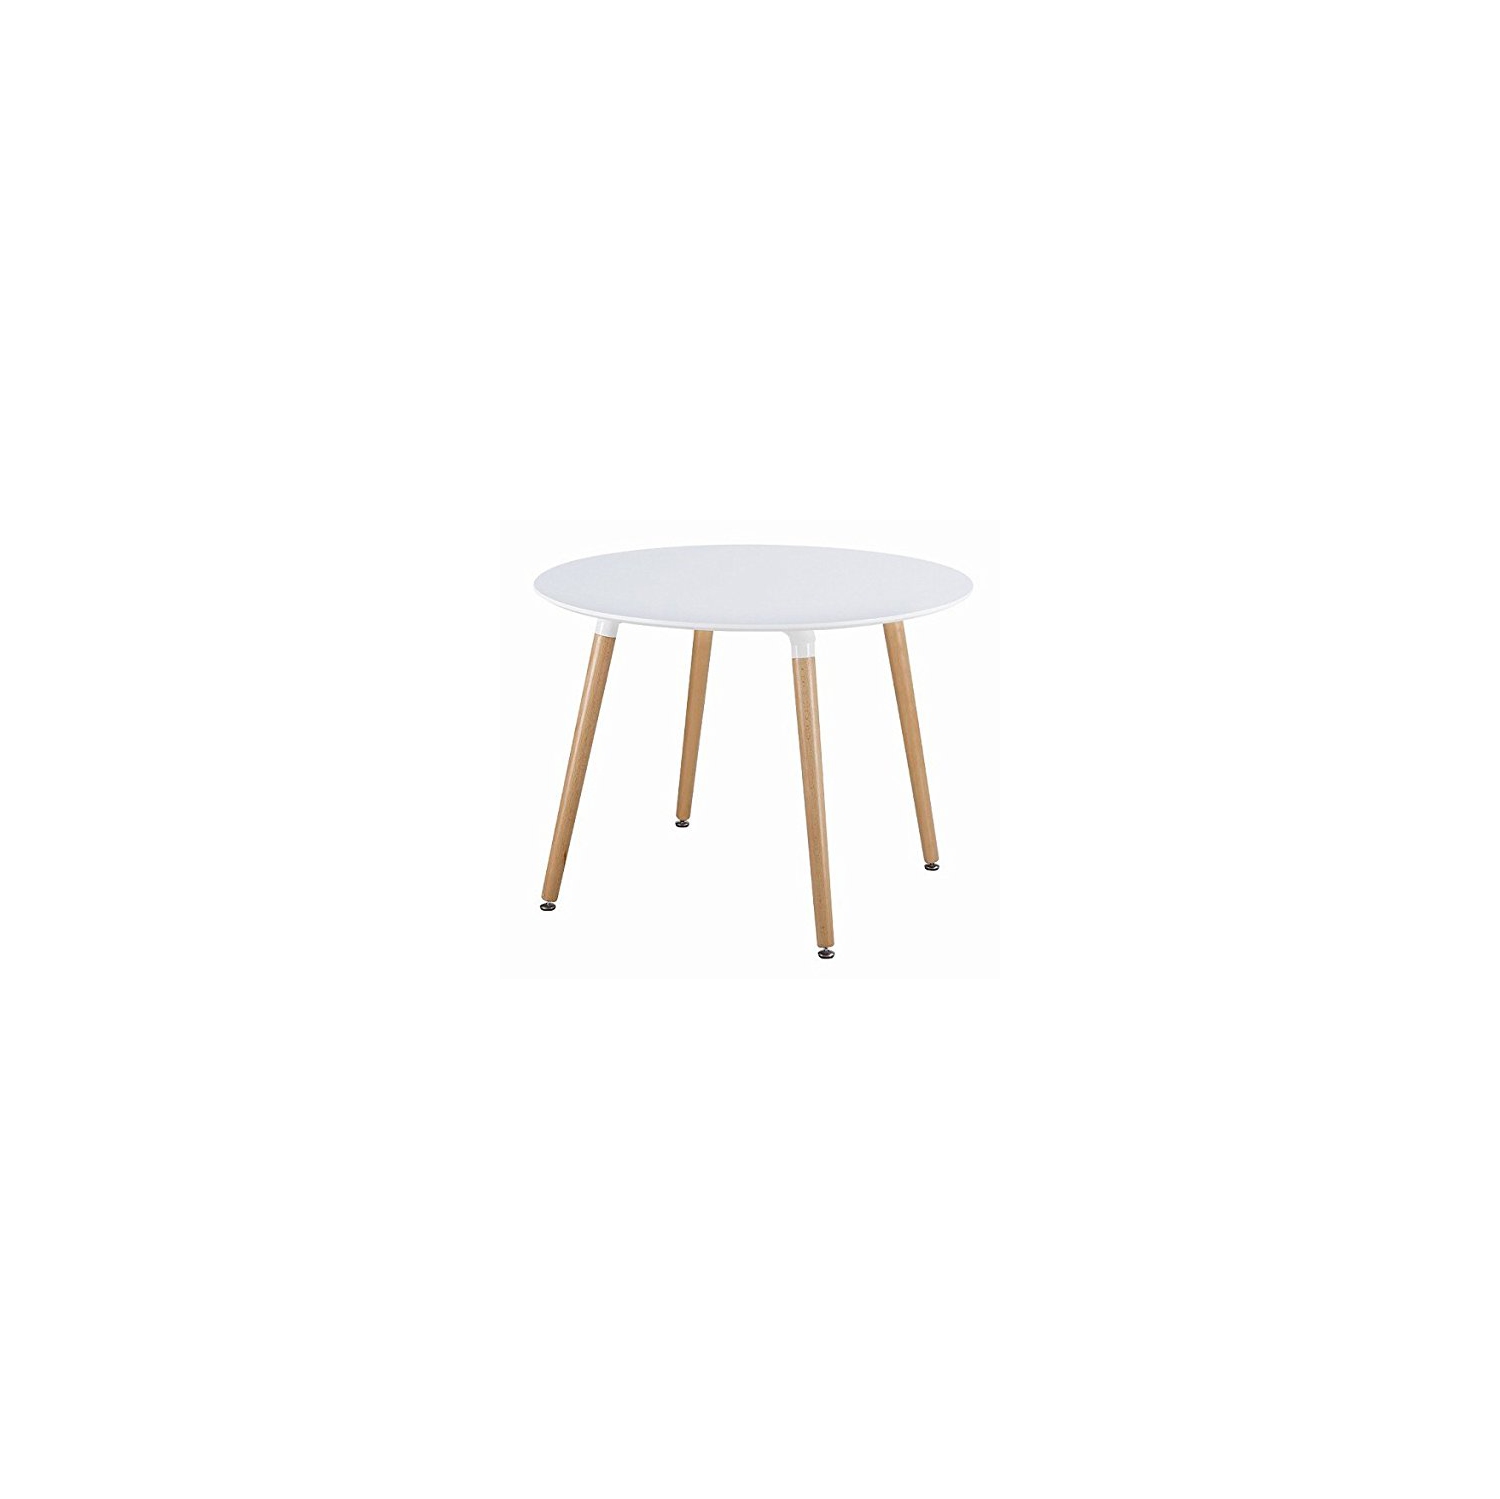 Nicer Furniture® Eames Style Dining Table with Wooden Legs- MDF Fiberboard Round Top 40" White